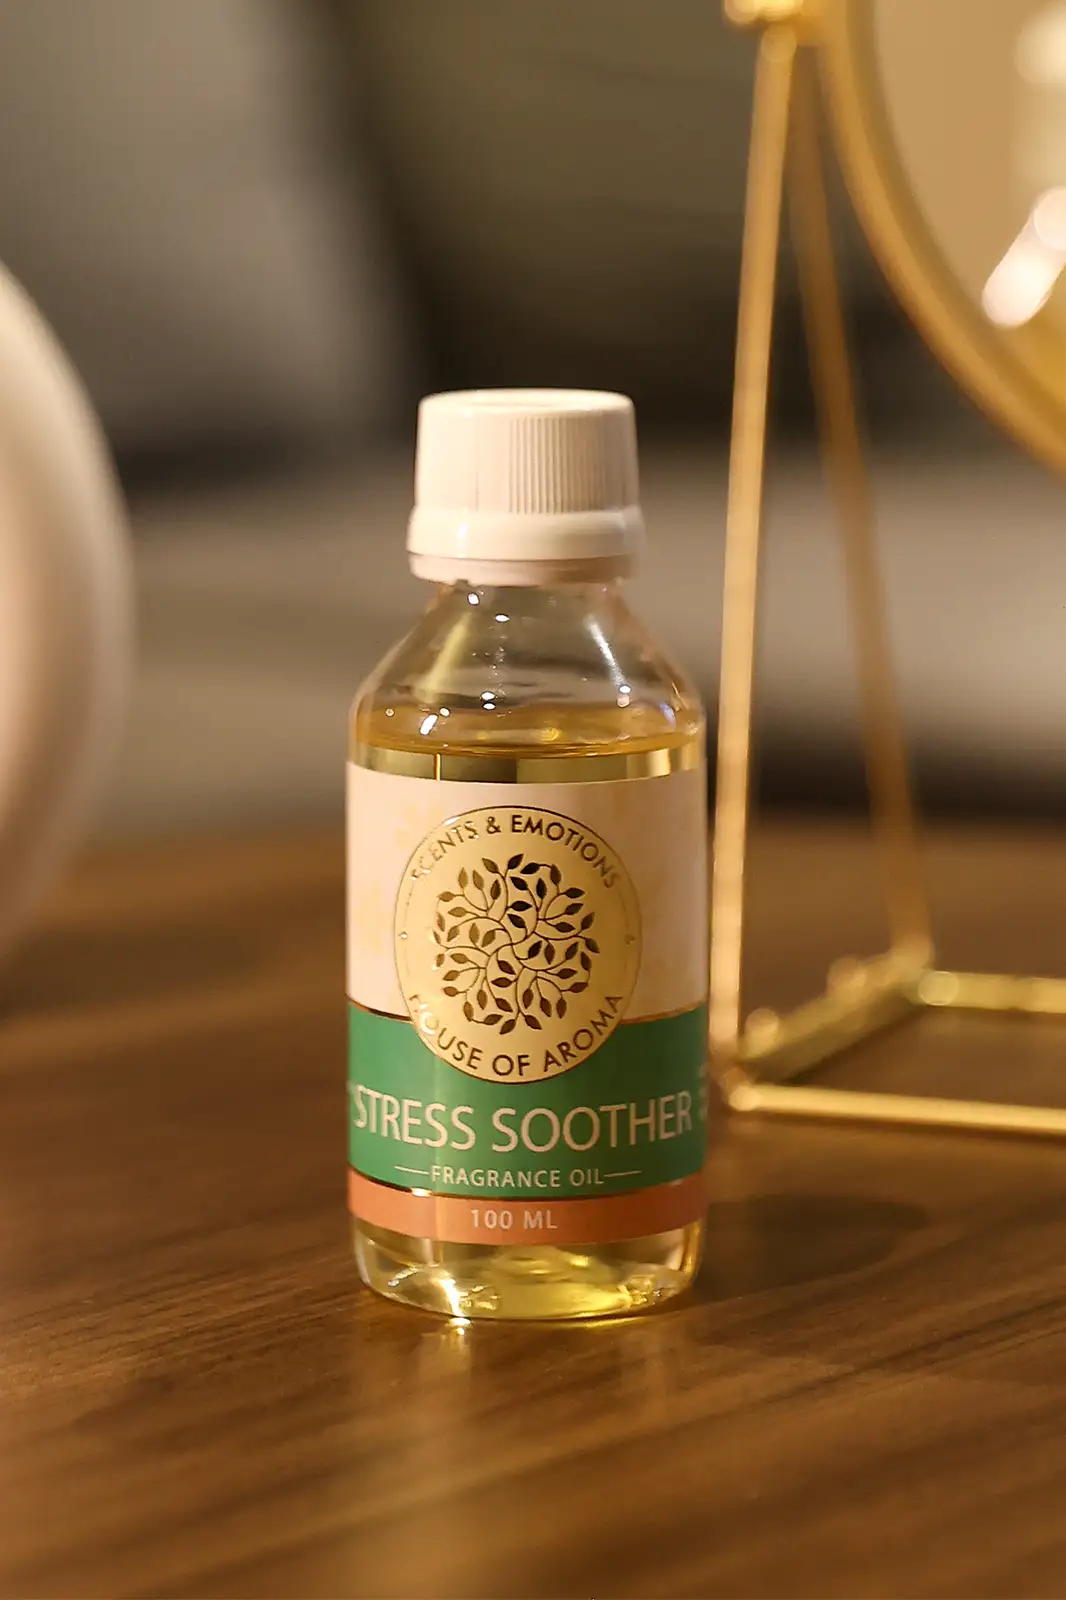 stress soother fragrance oil 100ml, Fragrance Oil, Aroma oil, Synthetic oils, Fragrance oil for candles, oil for diffusers, Aromatic oil, Candle oil, Aromatherapy oil, oil manufacturers, House of Aroma, stress soother fragrance oil, soothing fragrance, aroma oil for stress relief, best fragrance for relaxation, best fragrance for stress relief, stress soother aroma oil, stress soother oil, stress soother oil benefits, stress soother oil uses, fragrance for relaxation